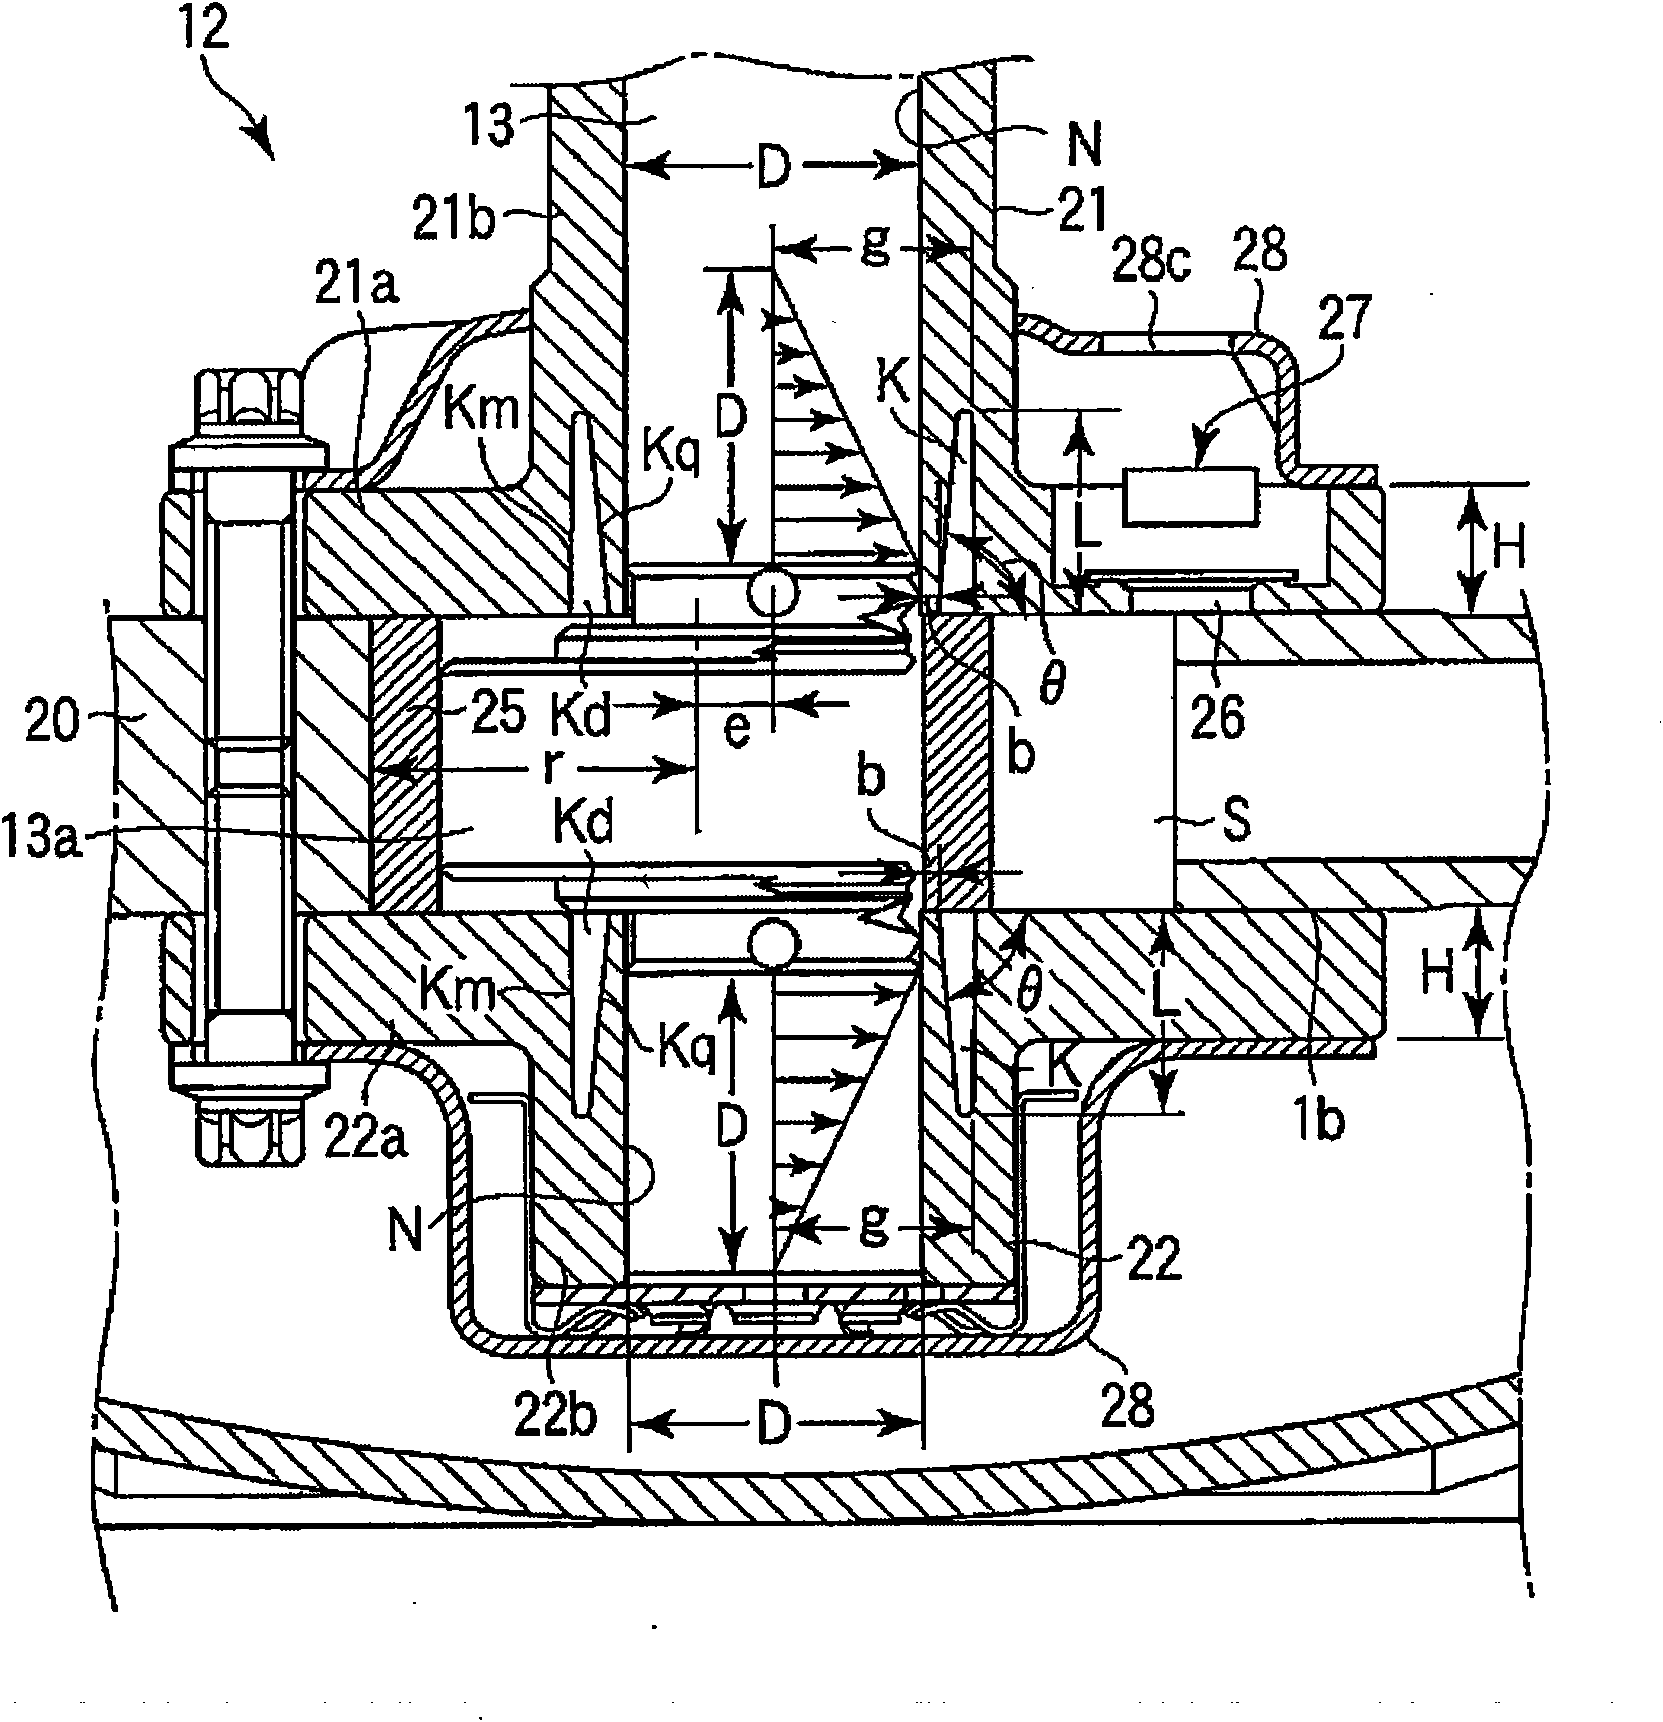 Enclosed compressor and refrigeration cycle device